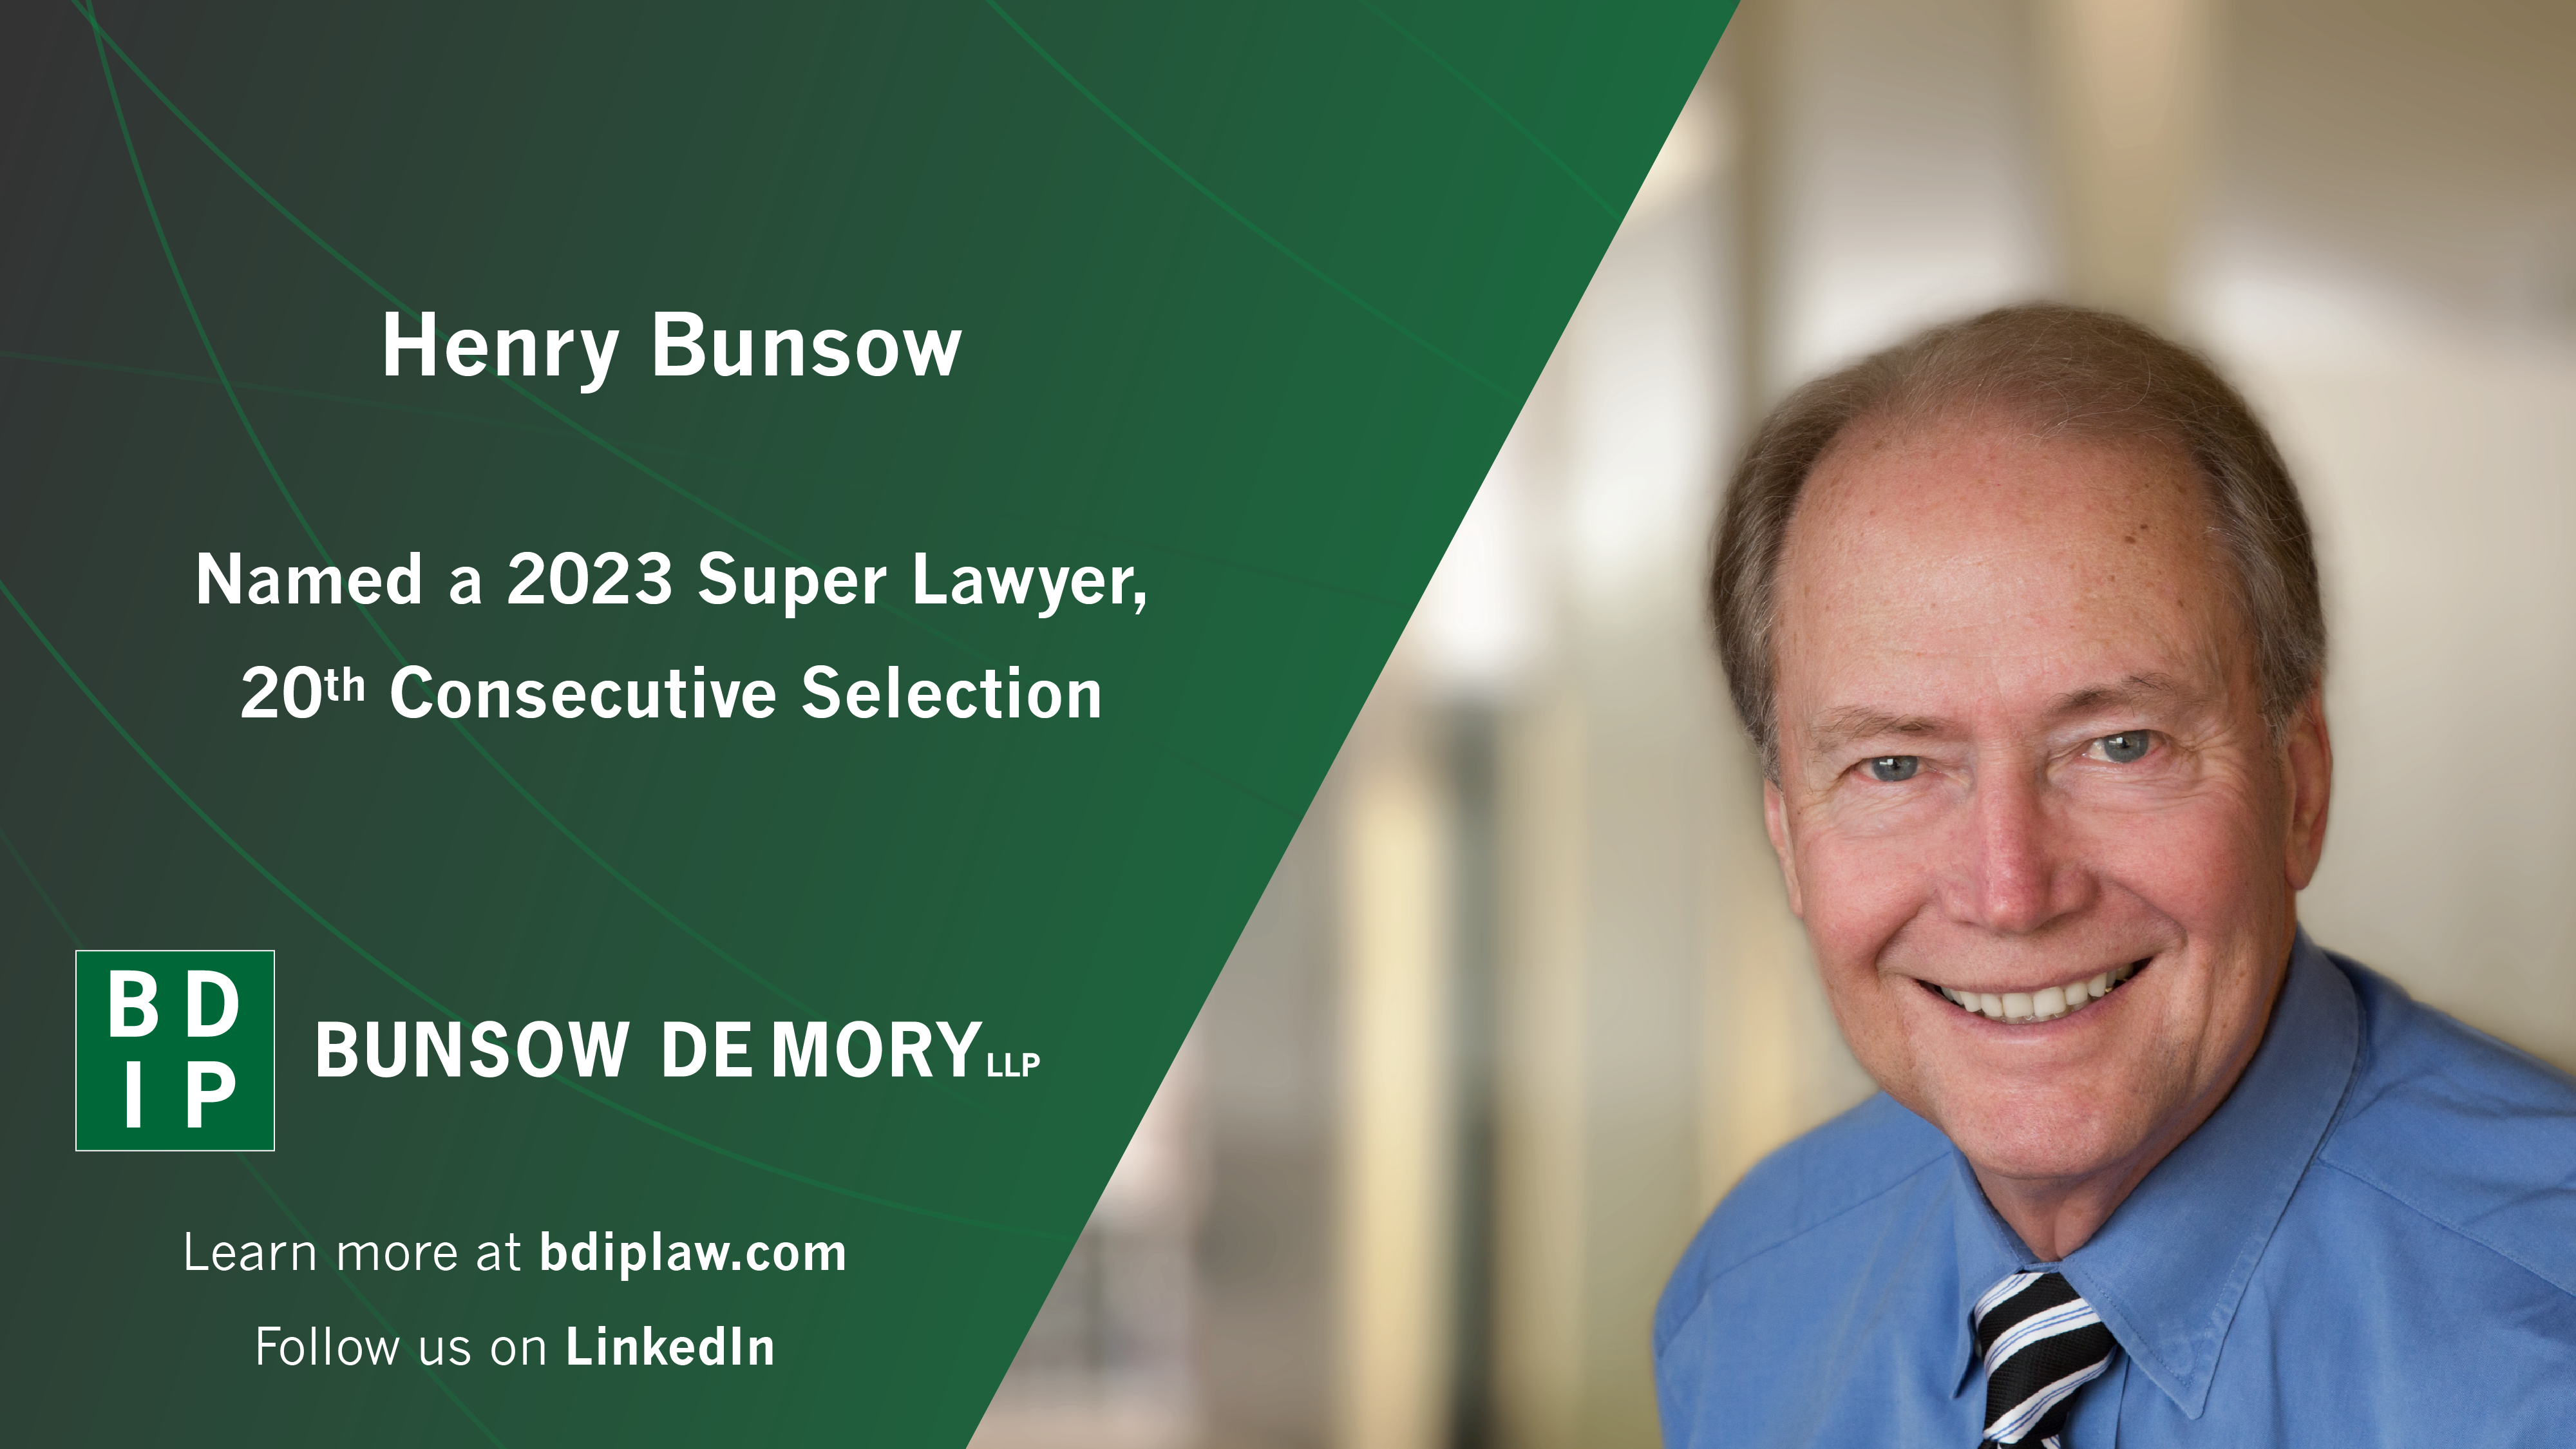 Henry Bunsow Named 2023 Northern California Super Lawyer